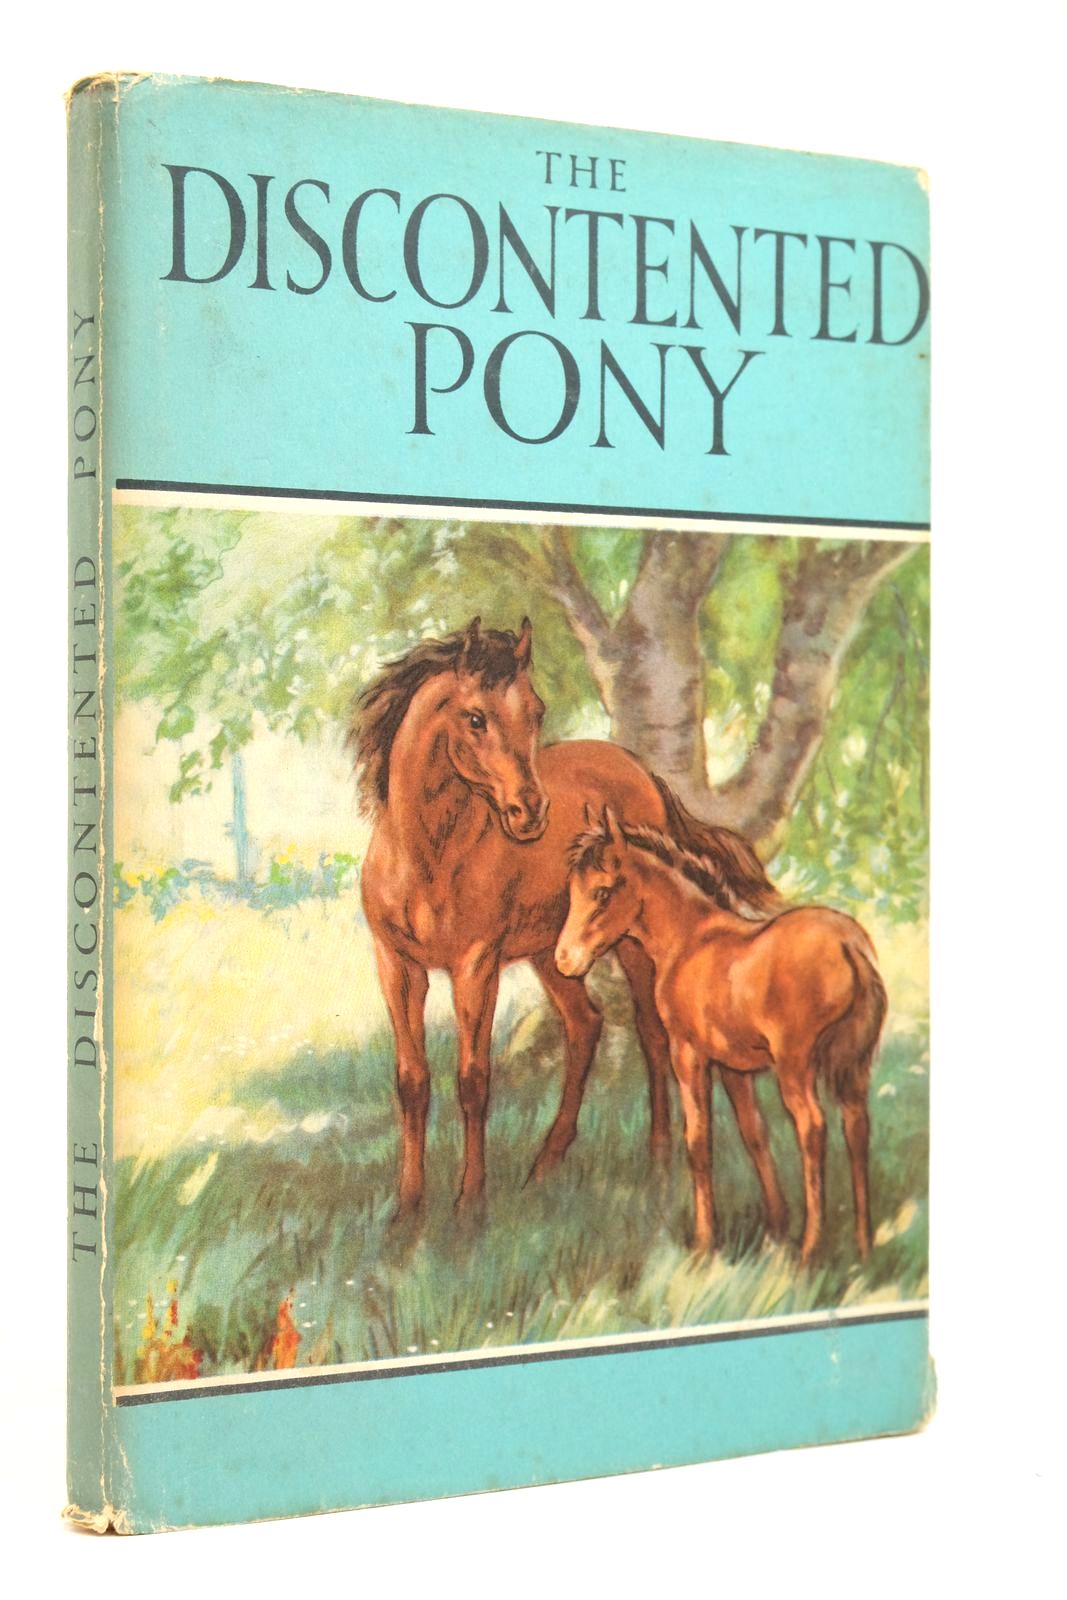 Photo of THE DISCONTENTED PONY written by Barr, Noel illustrated by Hickling, P.B. published by Wills &amp; Hepworth Ltd. (STOCK CODE: 2135160)  for sale by Stella & Rose's Books